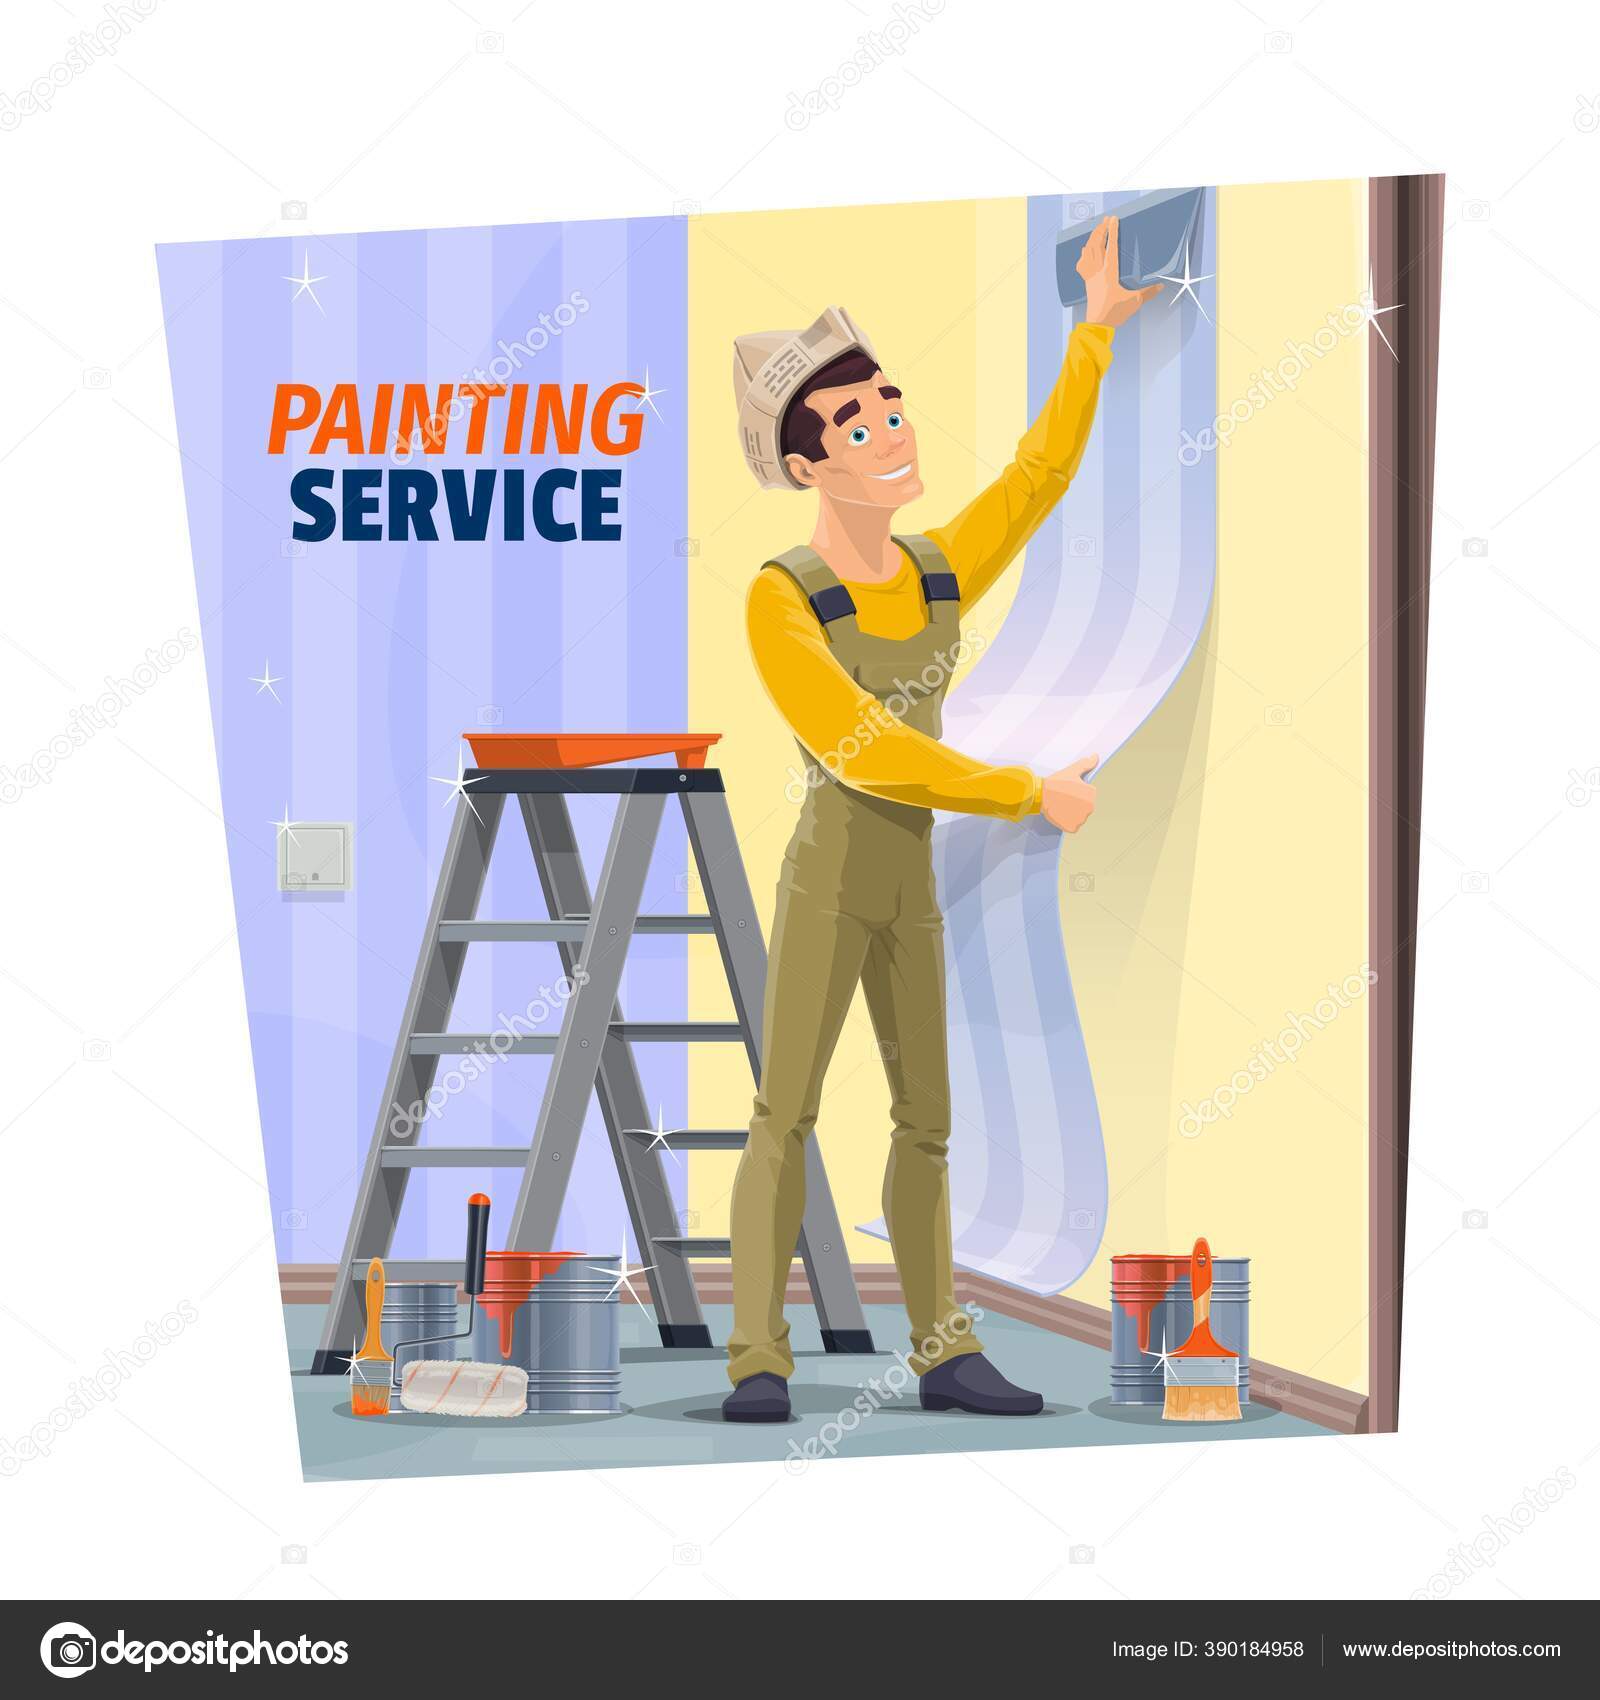 Wallpapering concept vector illustration in flat style Vector illustration  of woman papering wall repairing a house  CanStock